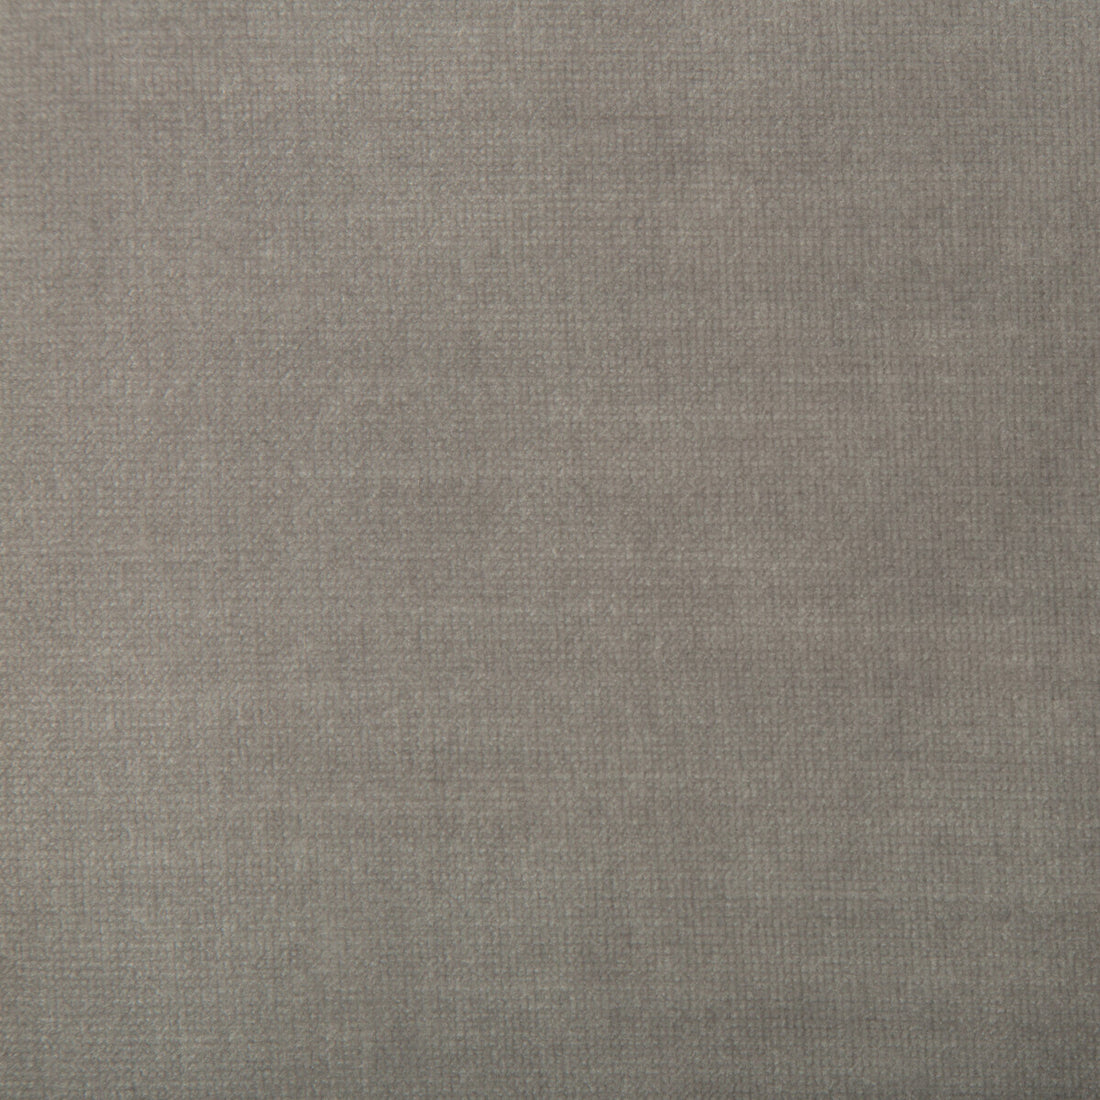 Chessford fabric in grey color - pattern 35360.11.0 - by Kravet Smart in the Performance collection